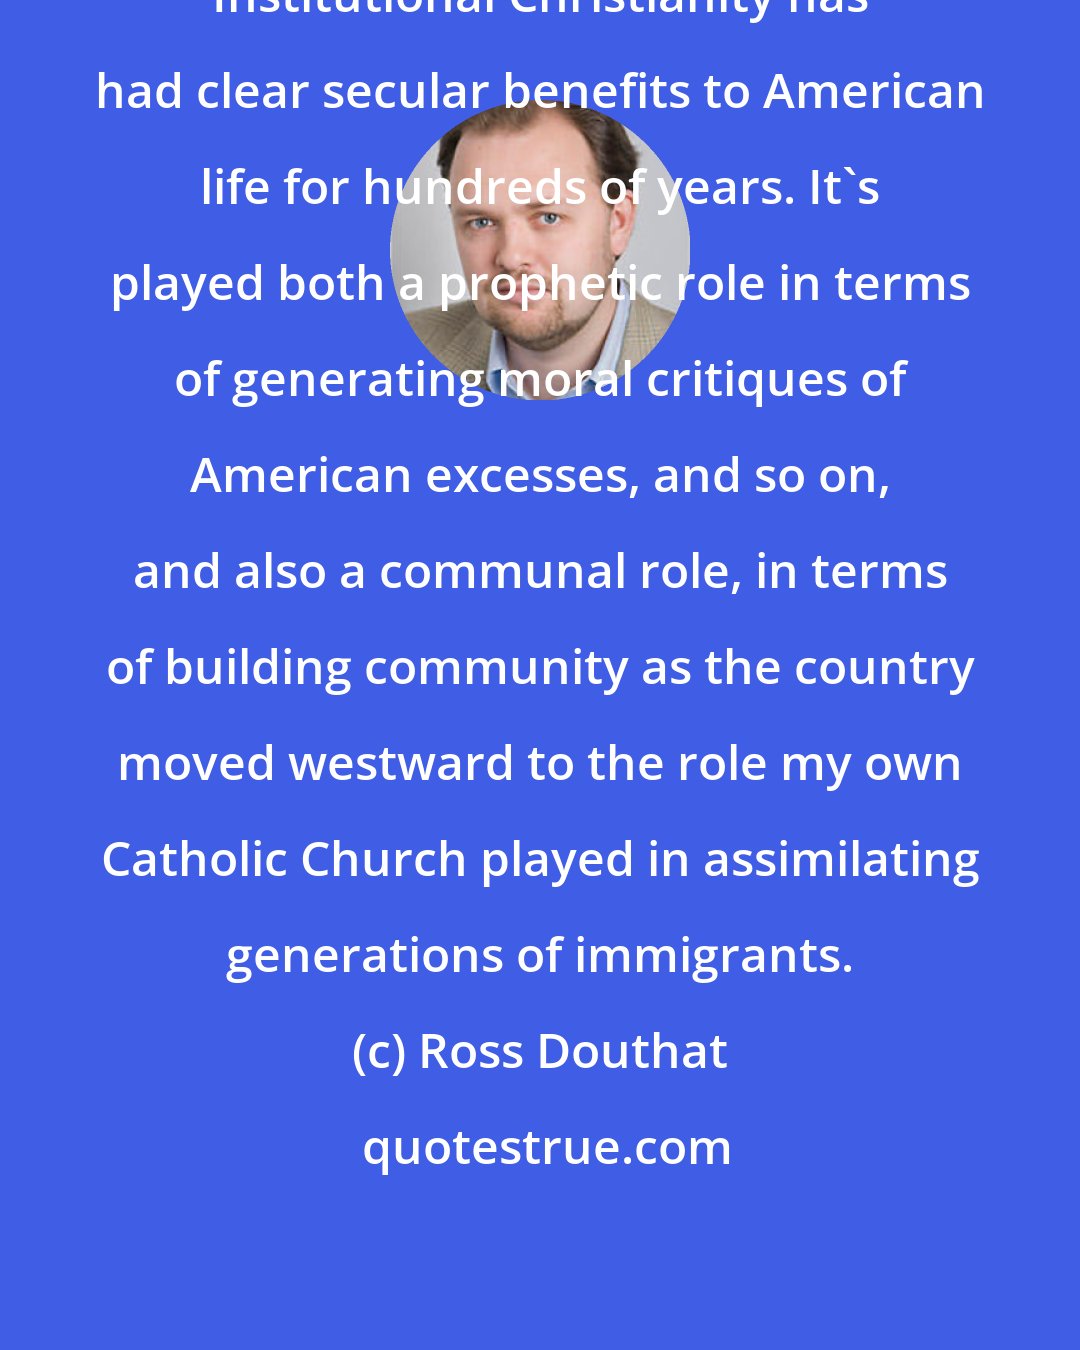 Ross Douthat: Institutional Christianity has had clear secular benefits to American life for hundreds of years. It's played both a prophetic role in terms of generating moral critiques of American excesses, and so on, and also a communal role, in terms of building community as the country moved westward to the role my own Catholic Church played in assimilating generations of immigrants.